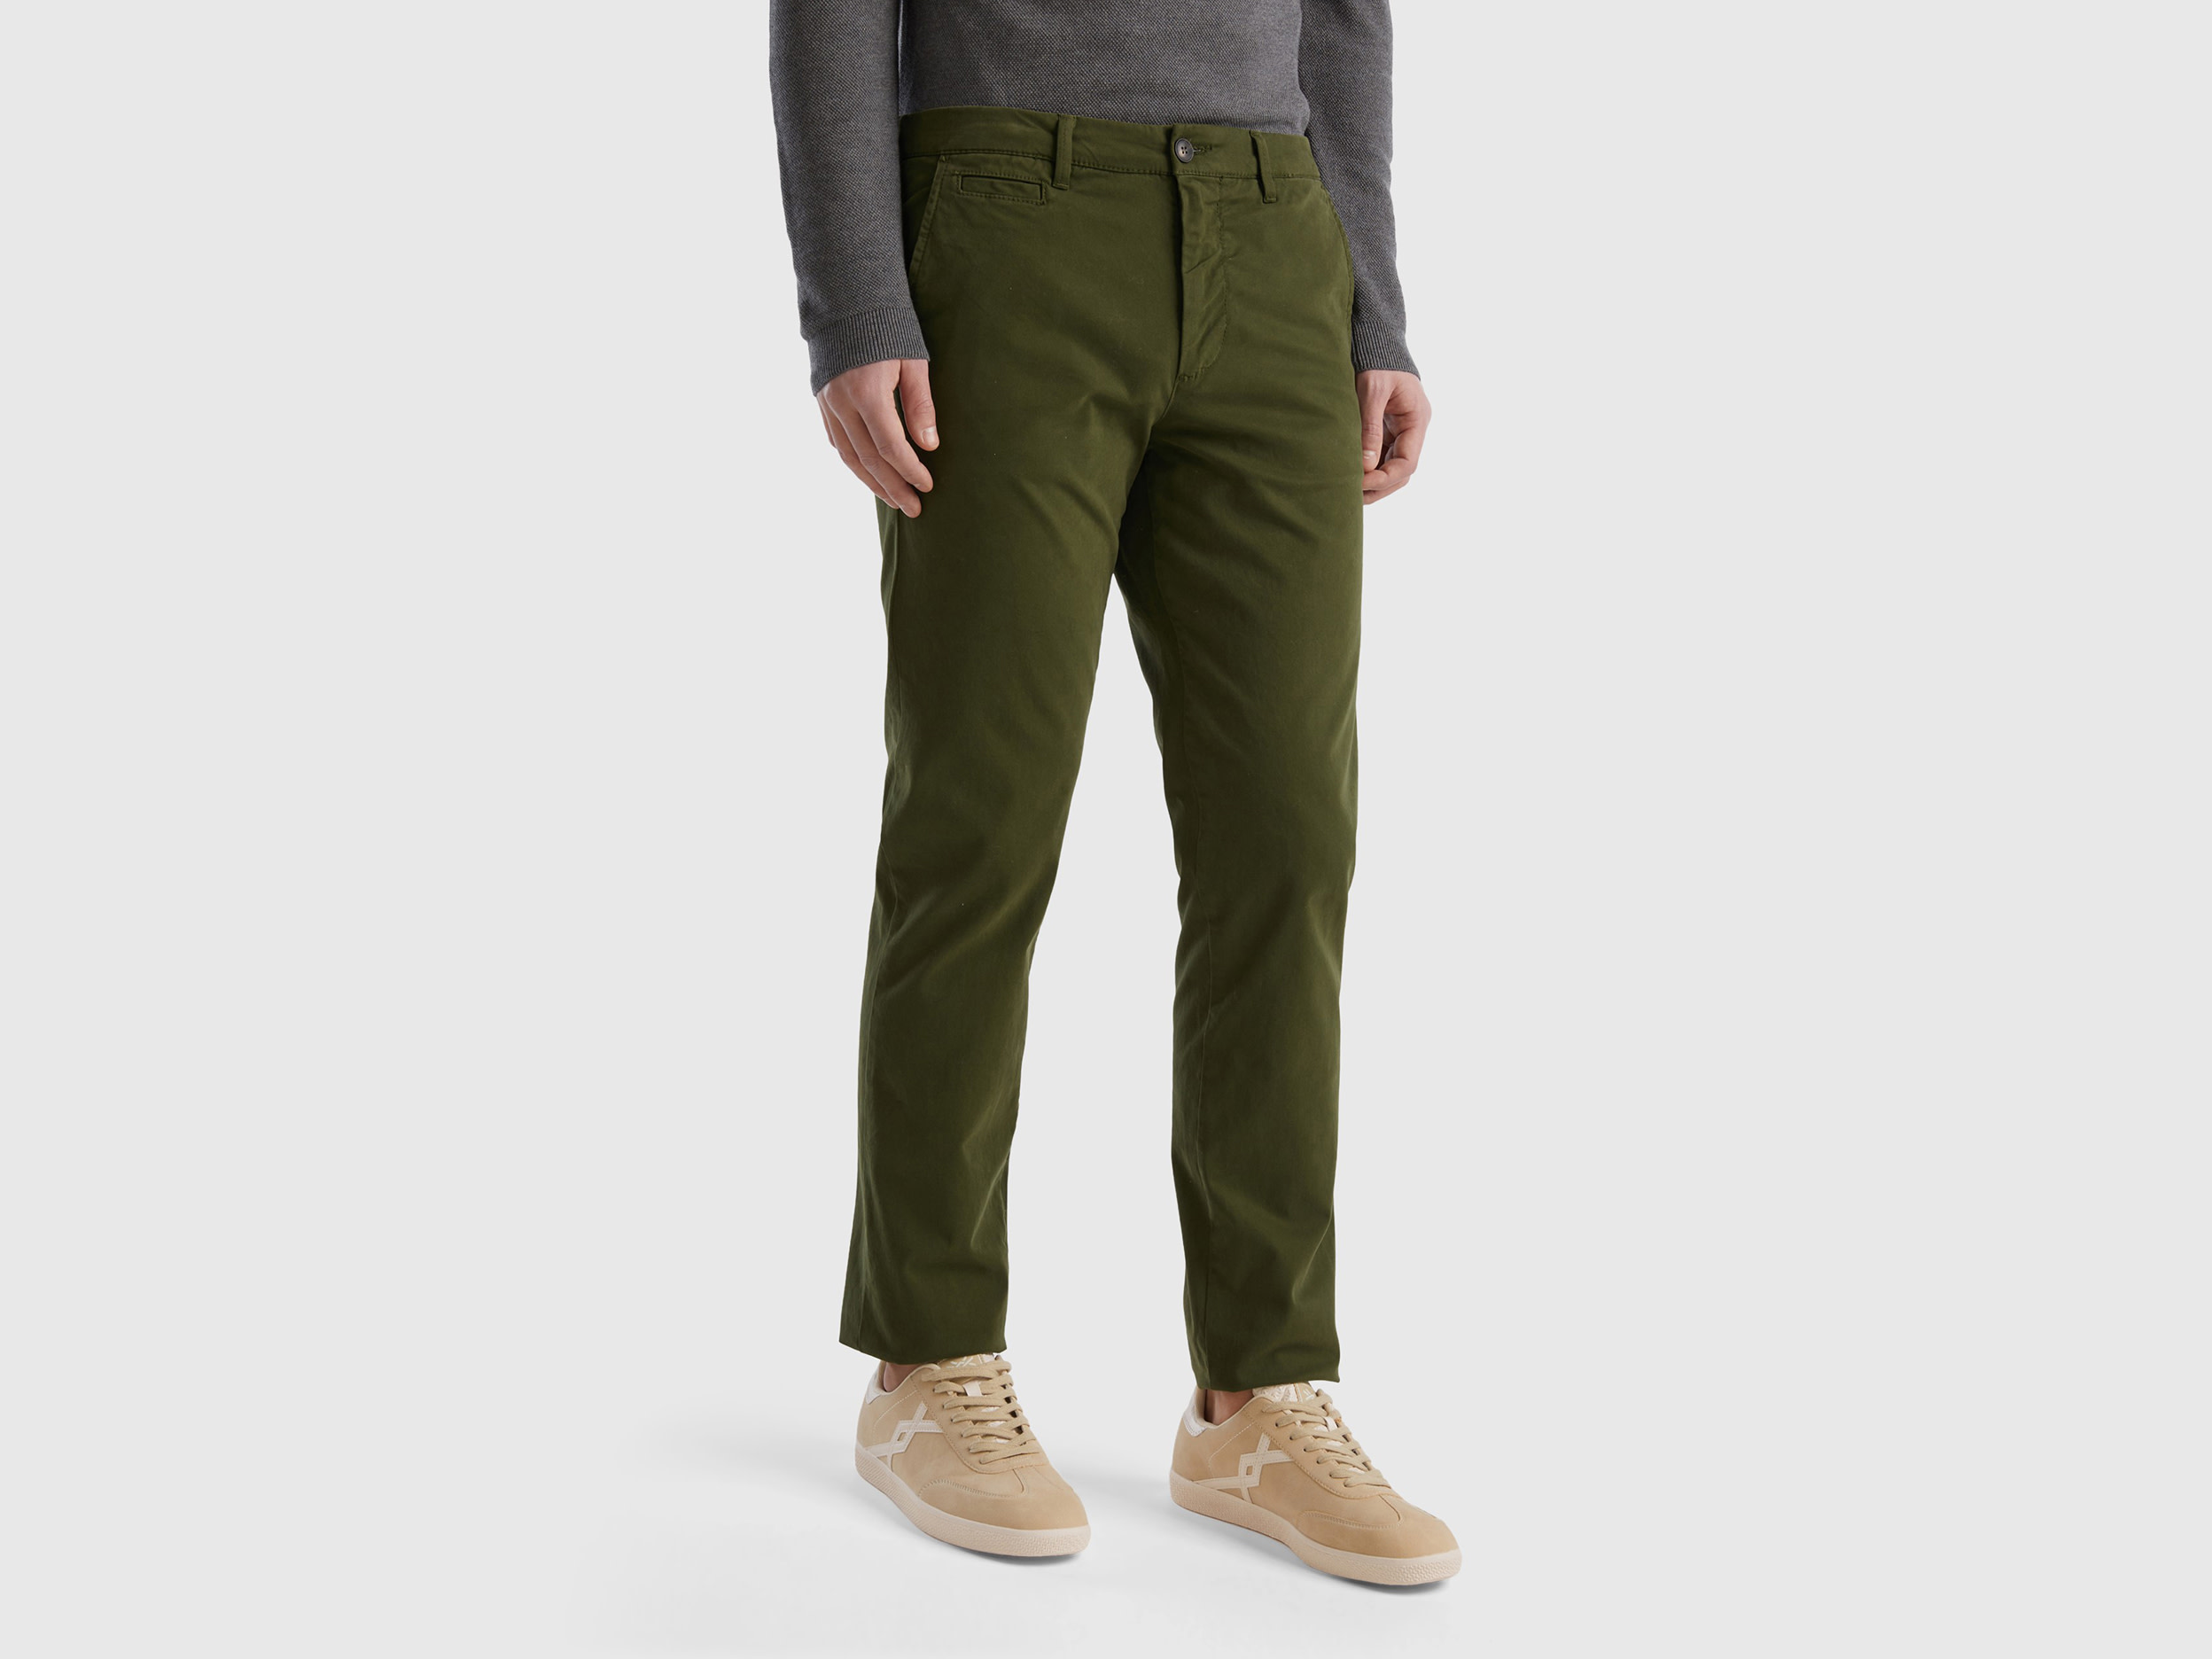 Benetton, Olive Green Slim Fit Chinos, size 46, , Men